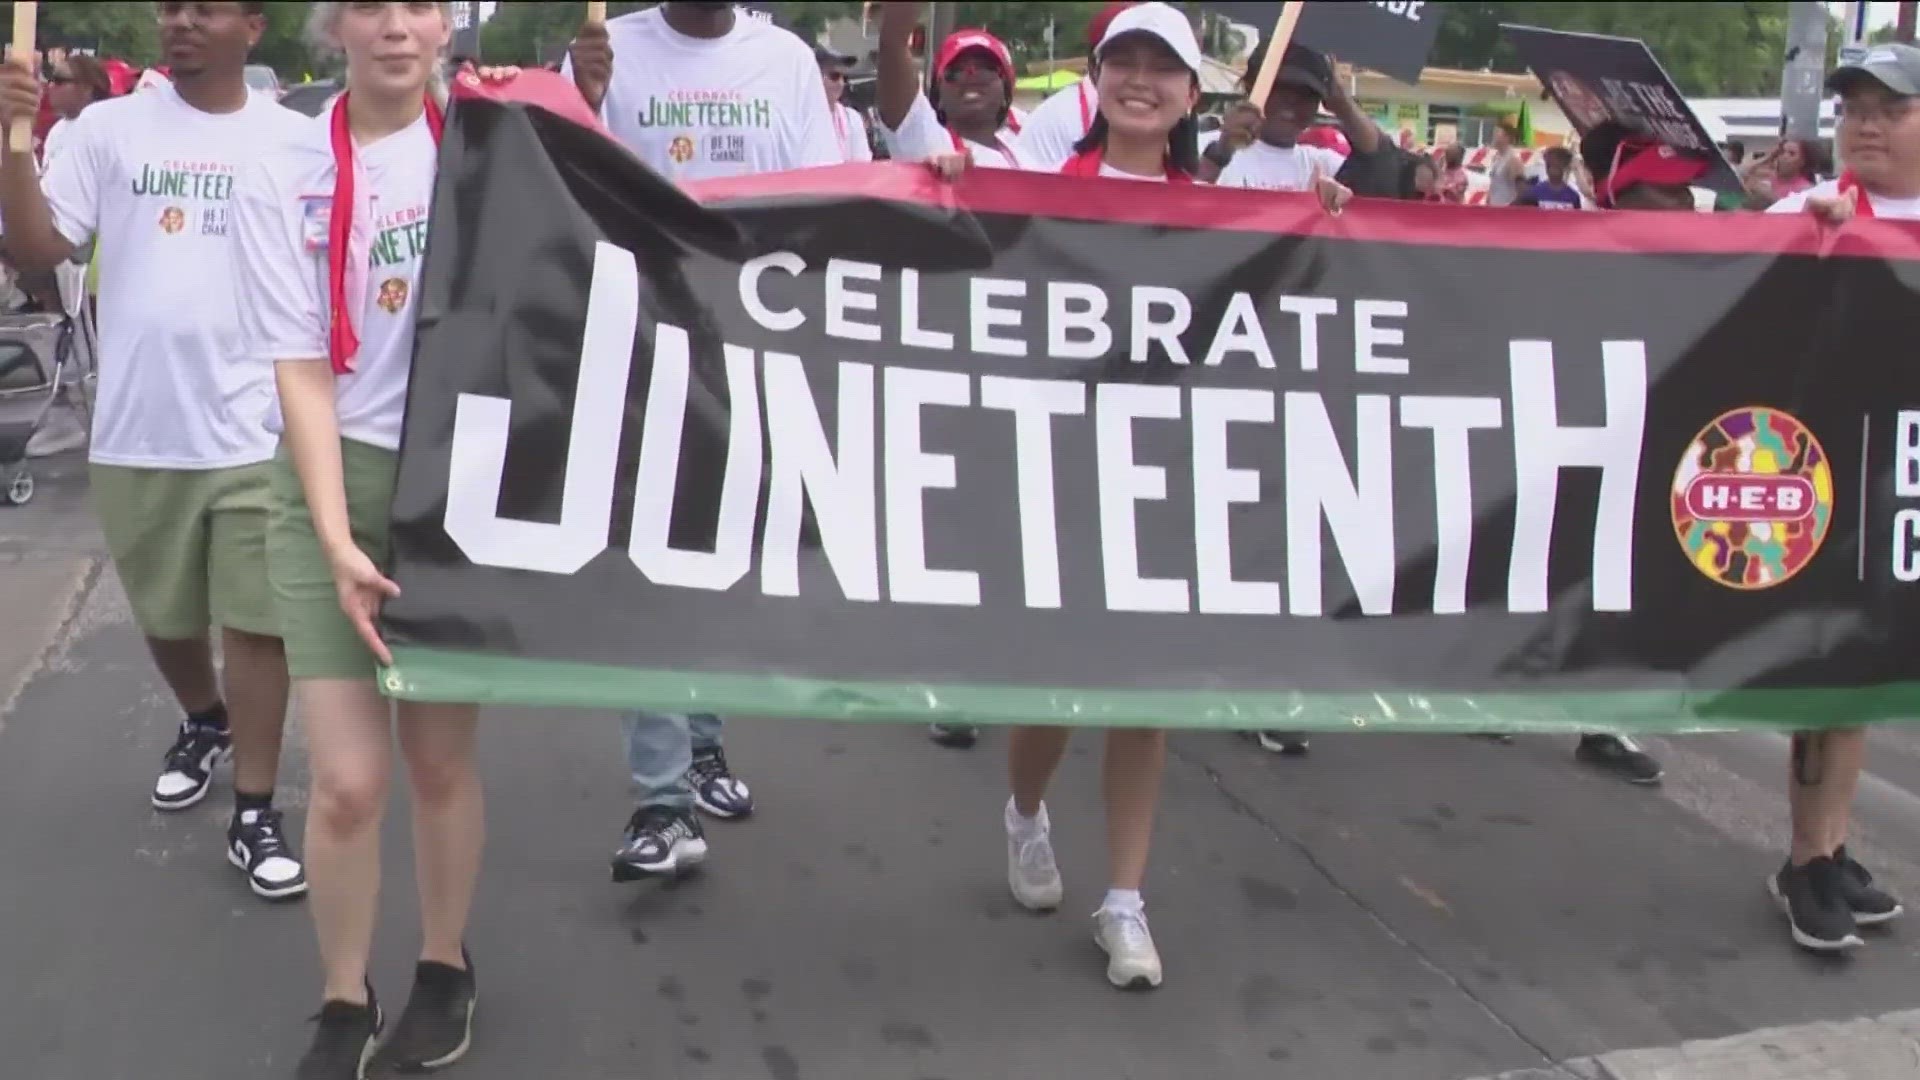 The triple-digit heat didn't deter the thousands who joined the celebrations in East Austin.